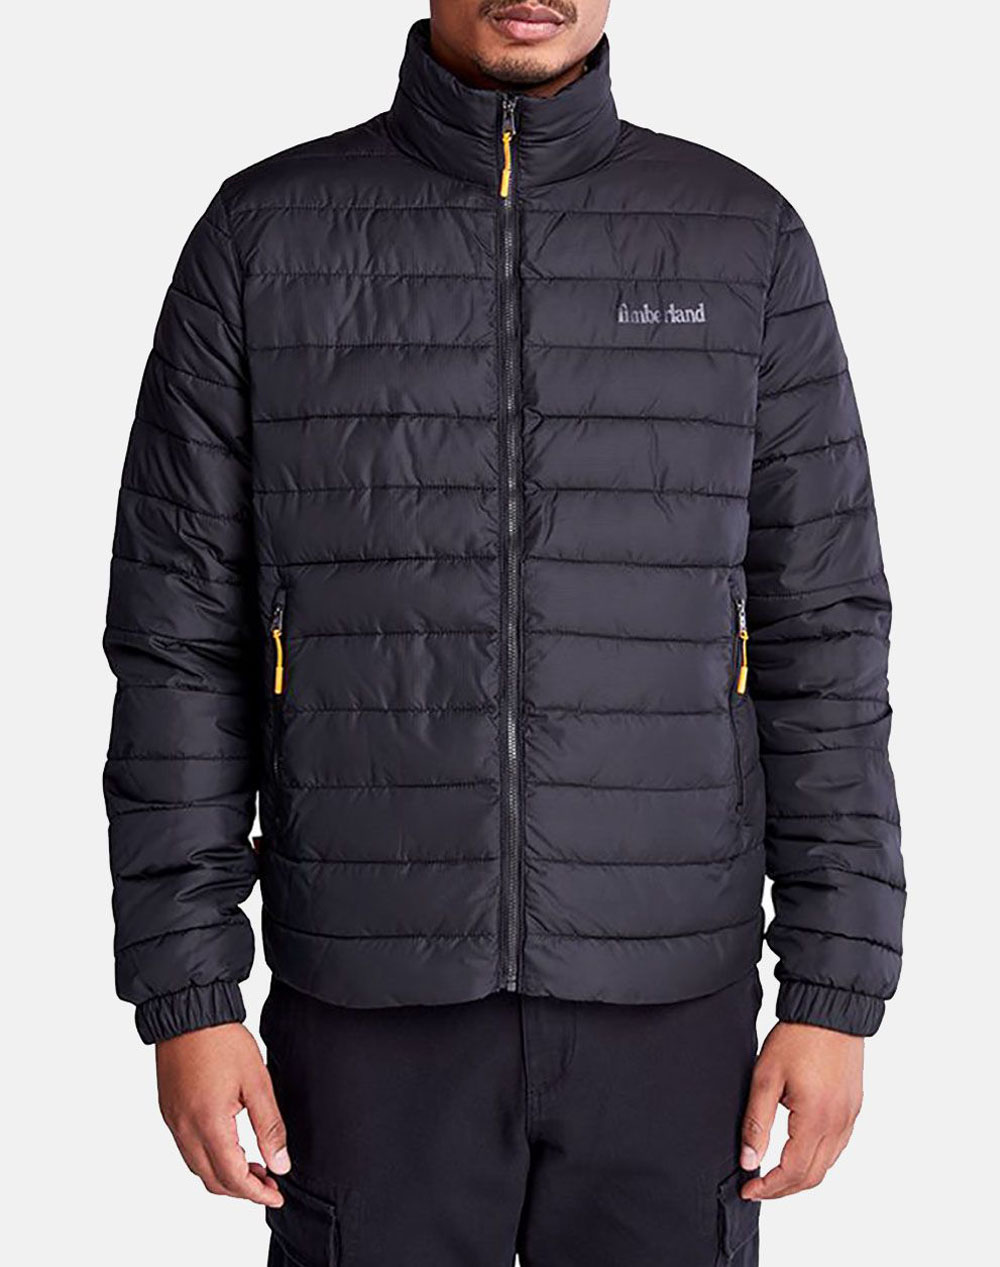 TIMBERLAND TIMBERLAND Durable Water Repellent Jacket TB0A5XQH-001 Black